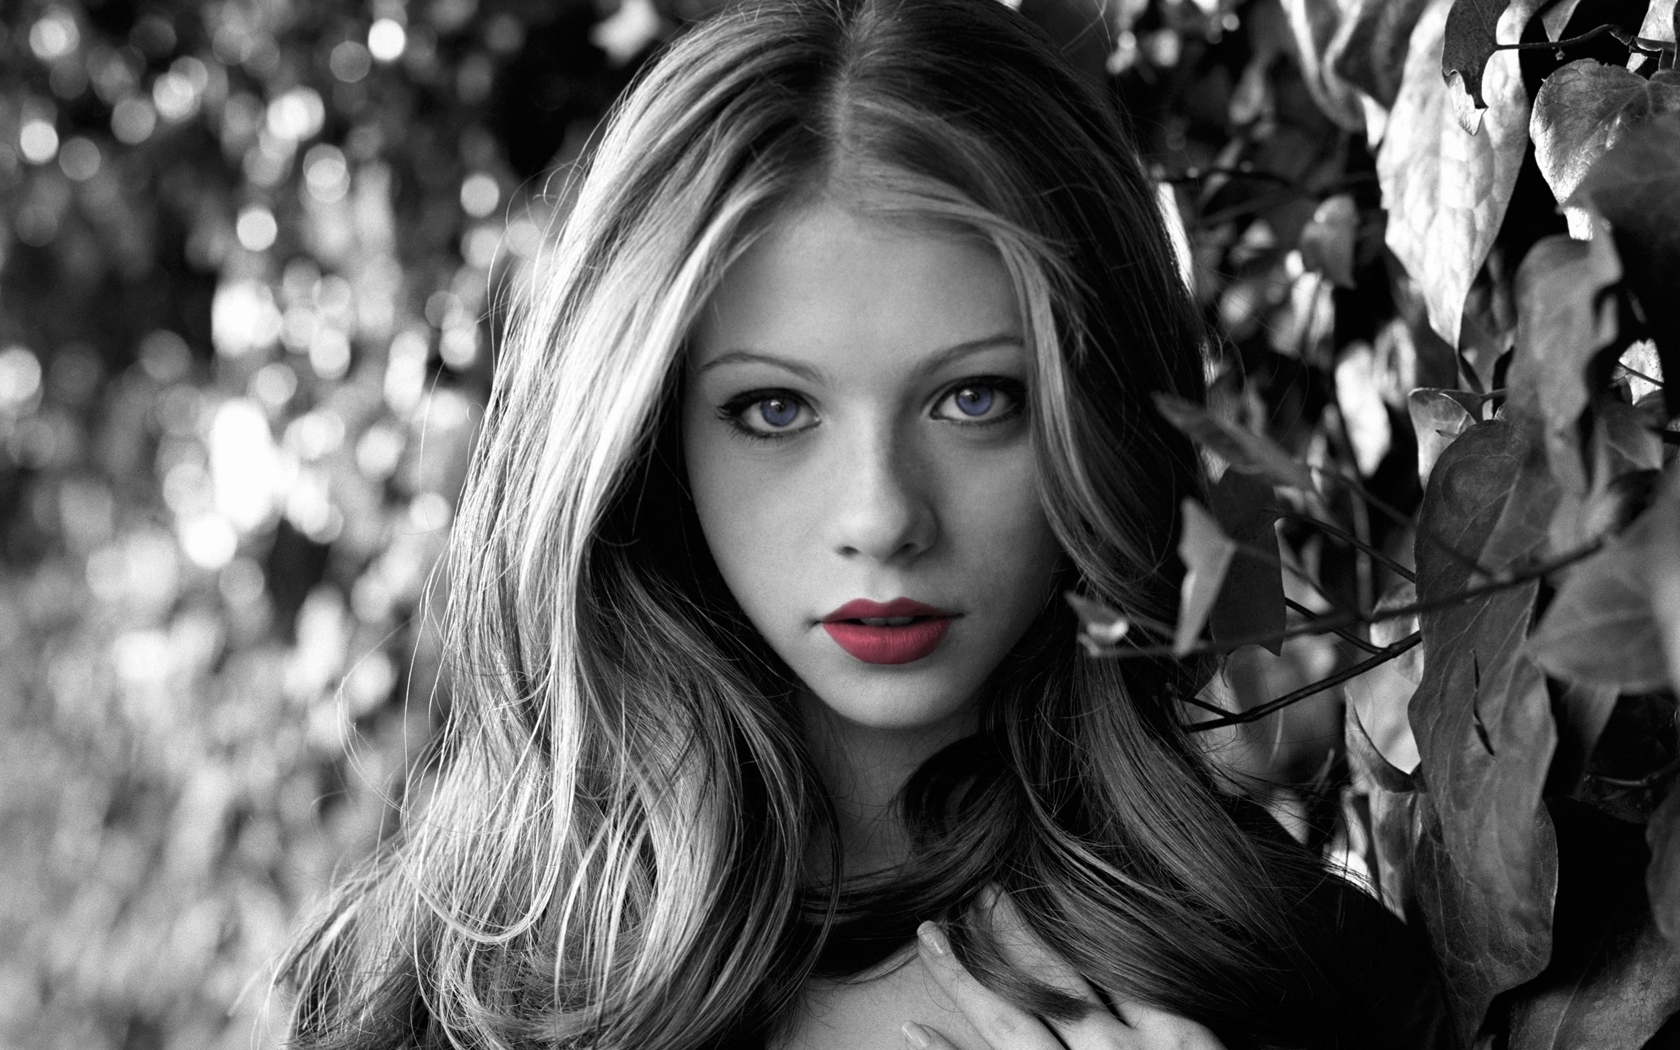 Blue eye hot girls Women Blue Eyes Actress Lips Michelle Trachtenberg People Celebrity Selective Coloring 1680x1050 Hot Girls Babes Hd Wallpapers Hd Desktop And Mobile Backgrounds